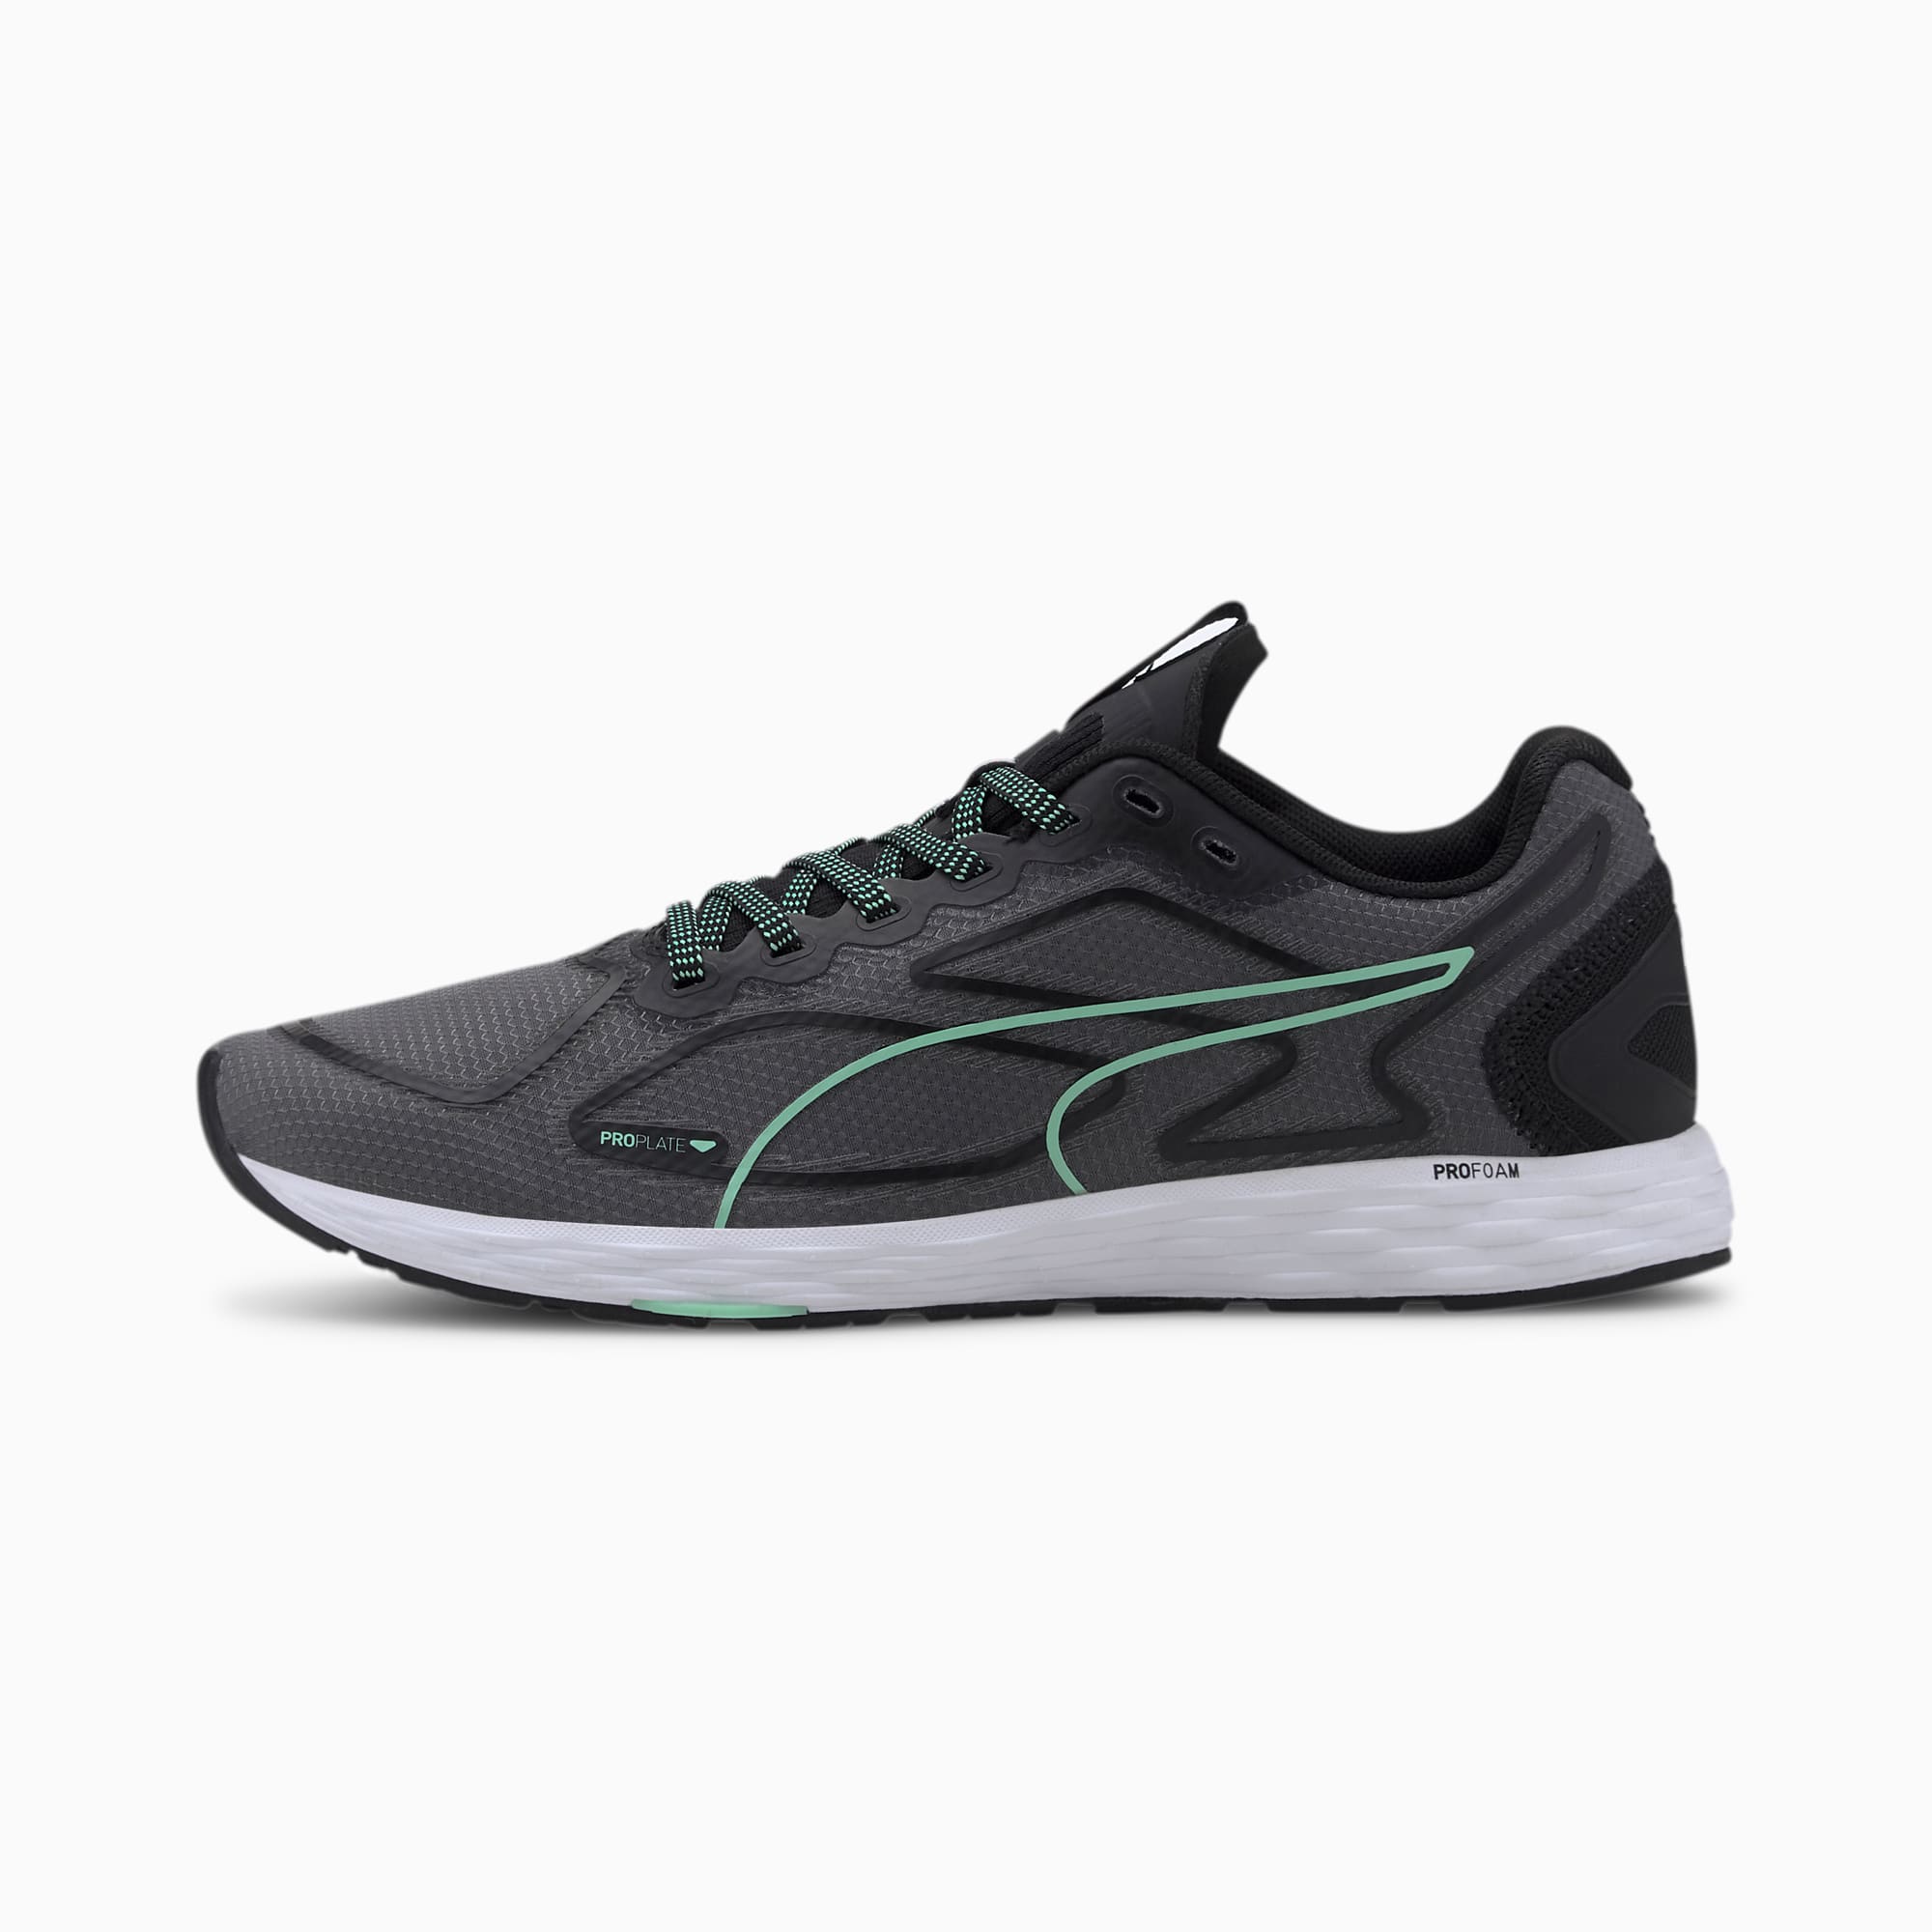 puma black and green sport shoes